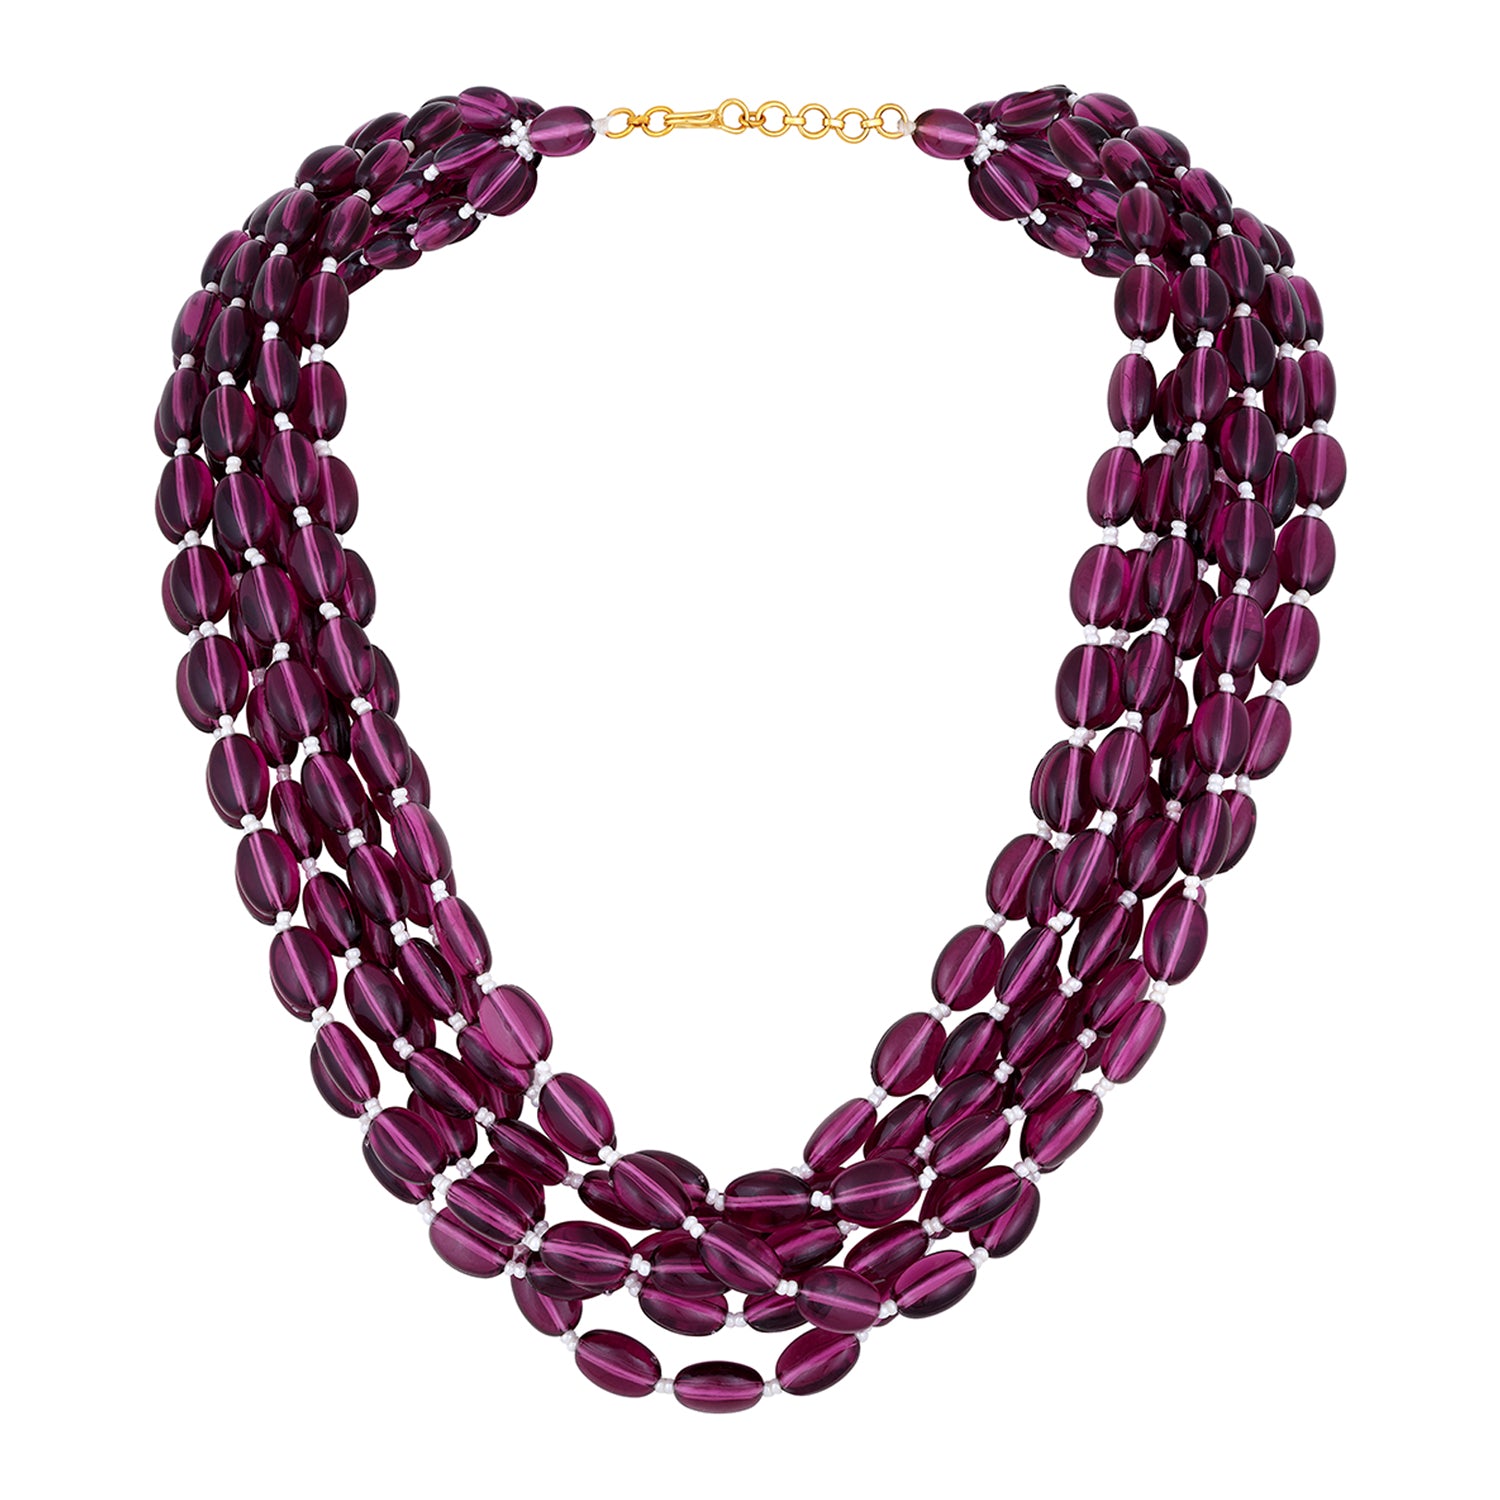 Multistrand Layered Necklace Chain